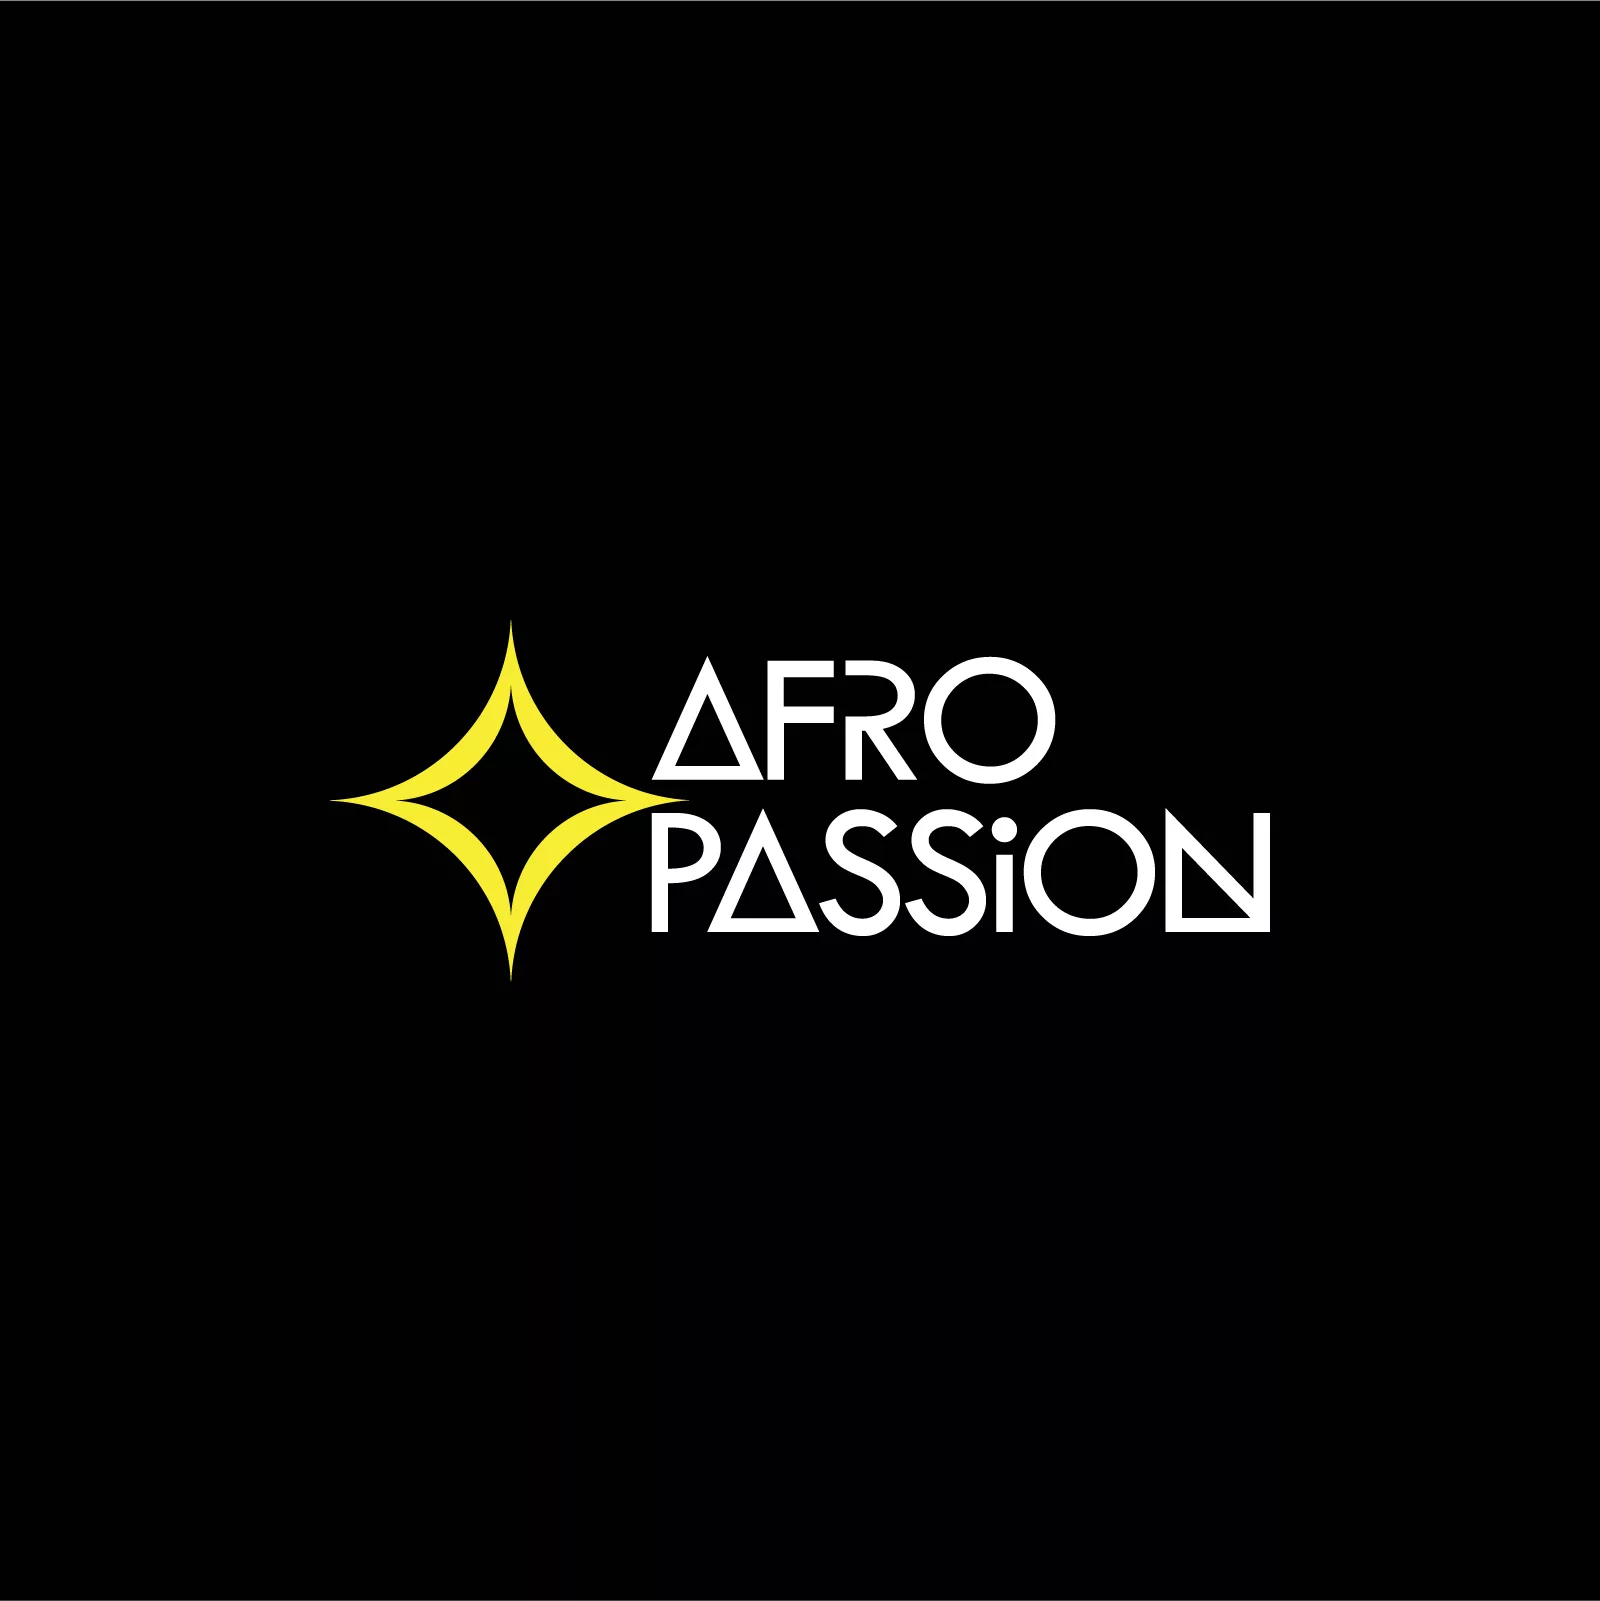 AfroPassion After